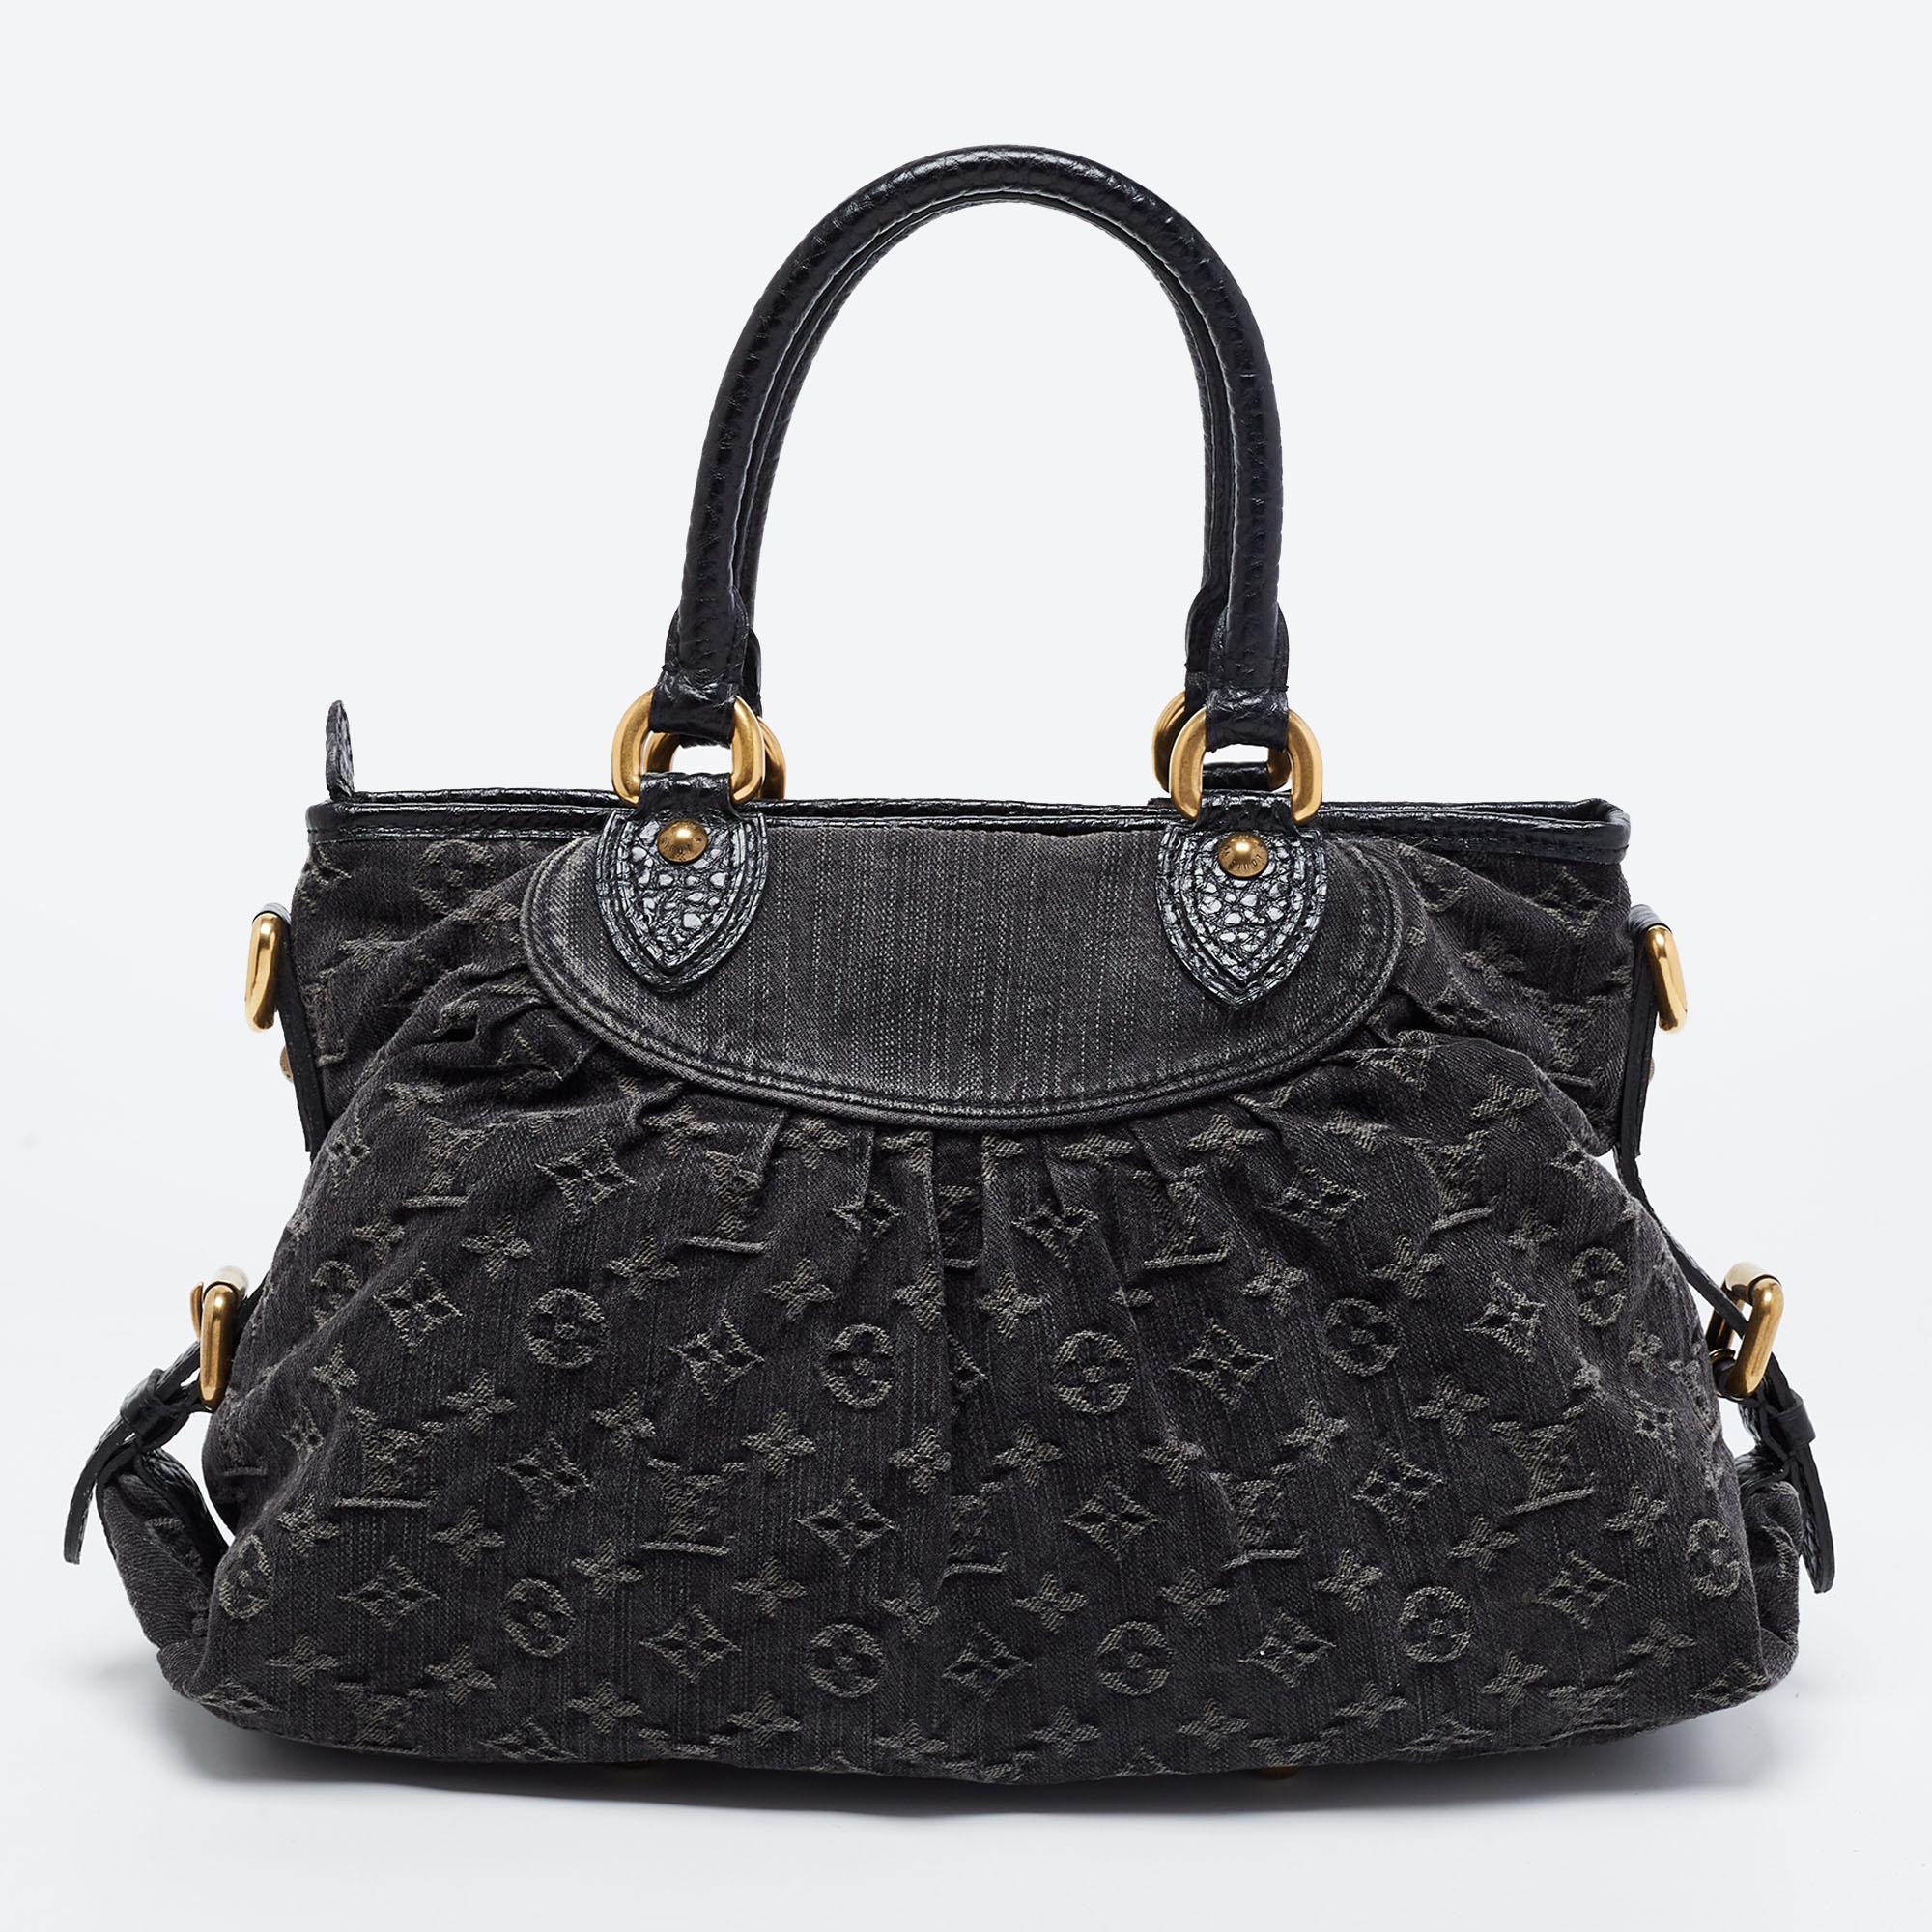 Louis Vuitton's handbags are high on style and craftsmanship, making them valuable creations of luxury. This Neo Cabby bag, like all the other handbags, is durable and stylish. Crafted from black Monogrammed denim and leather, the bag comes with two